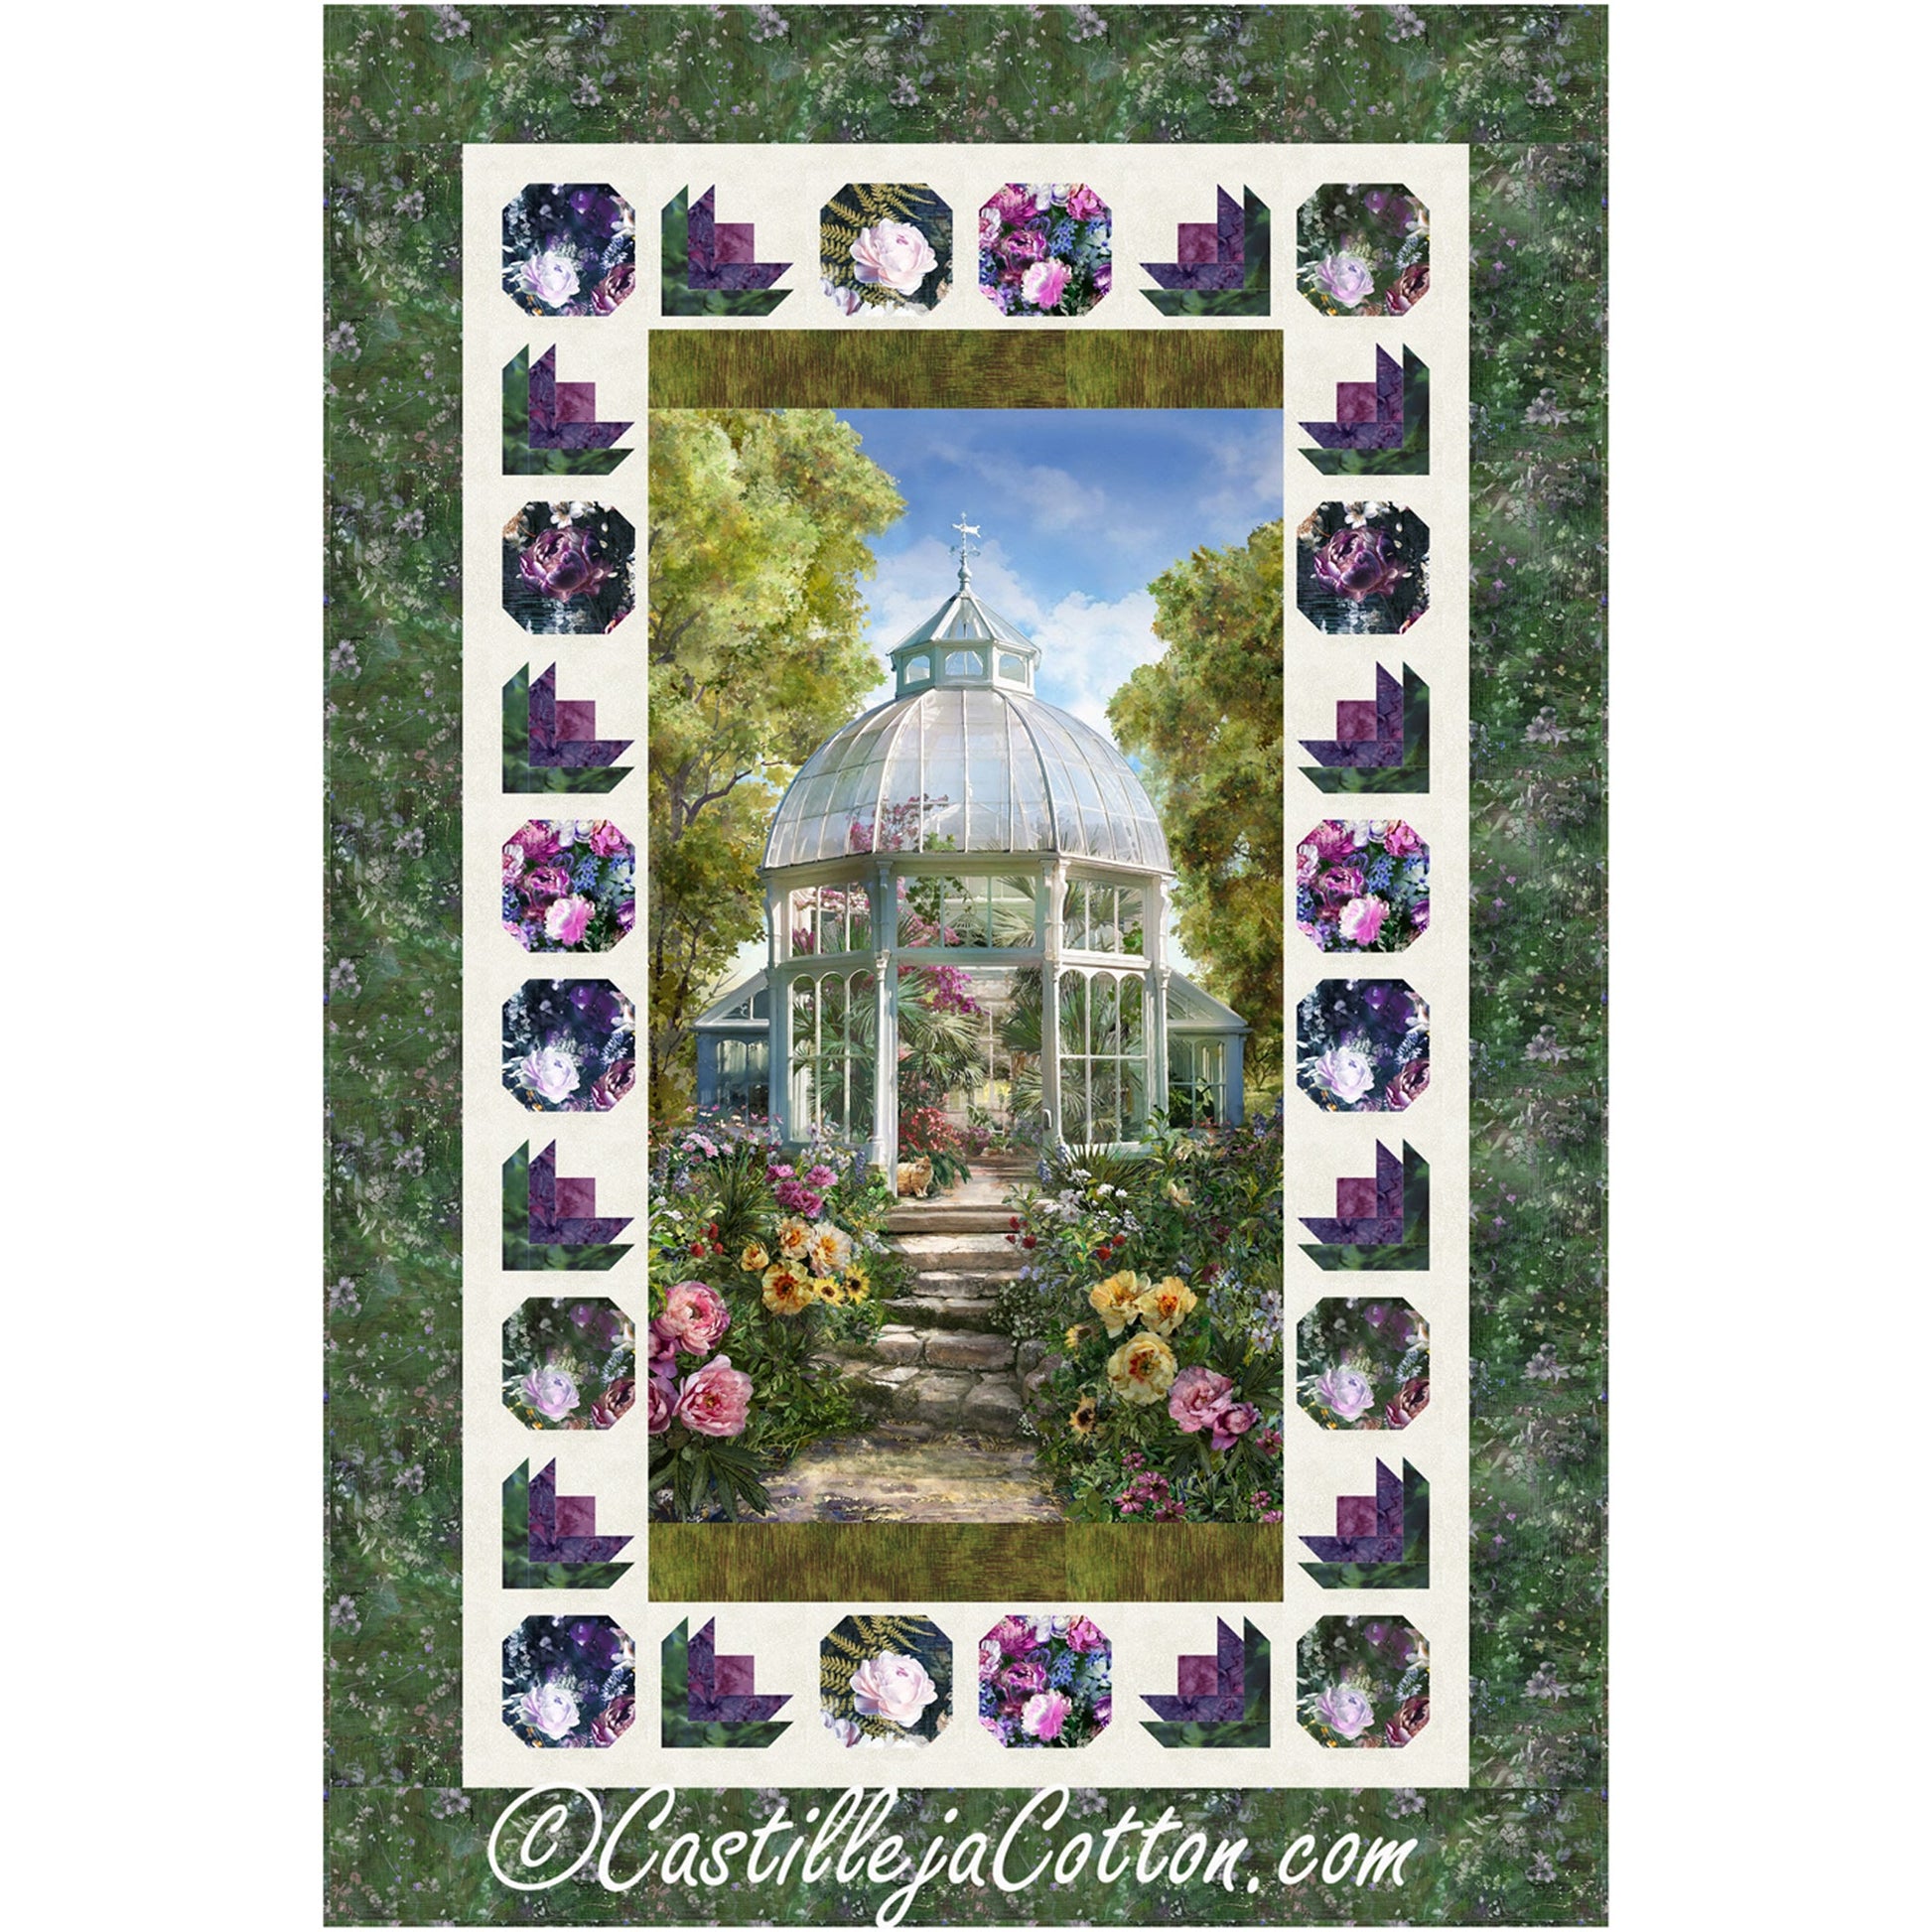 A colorful quilt pattern displaying a serene garden scene panel with vibrant flowers.